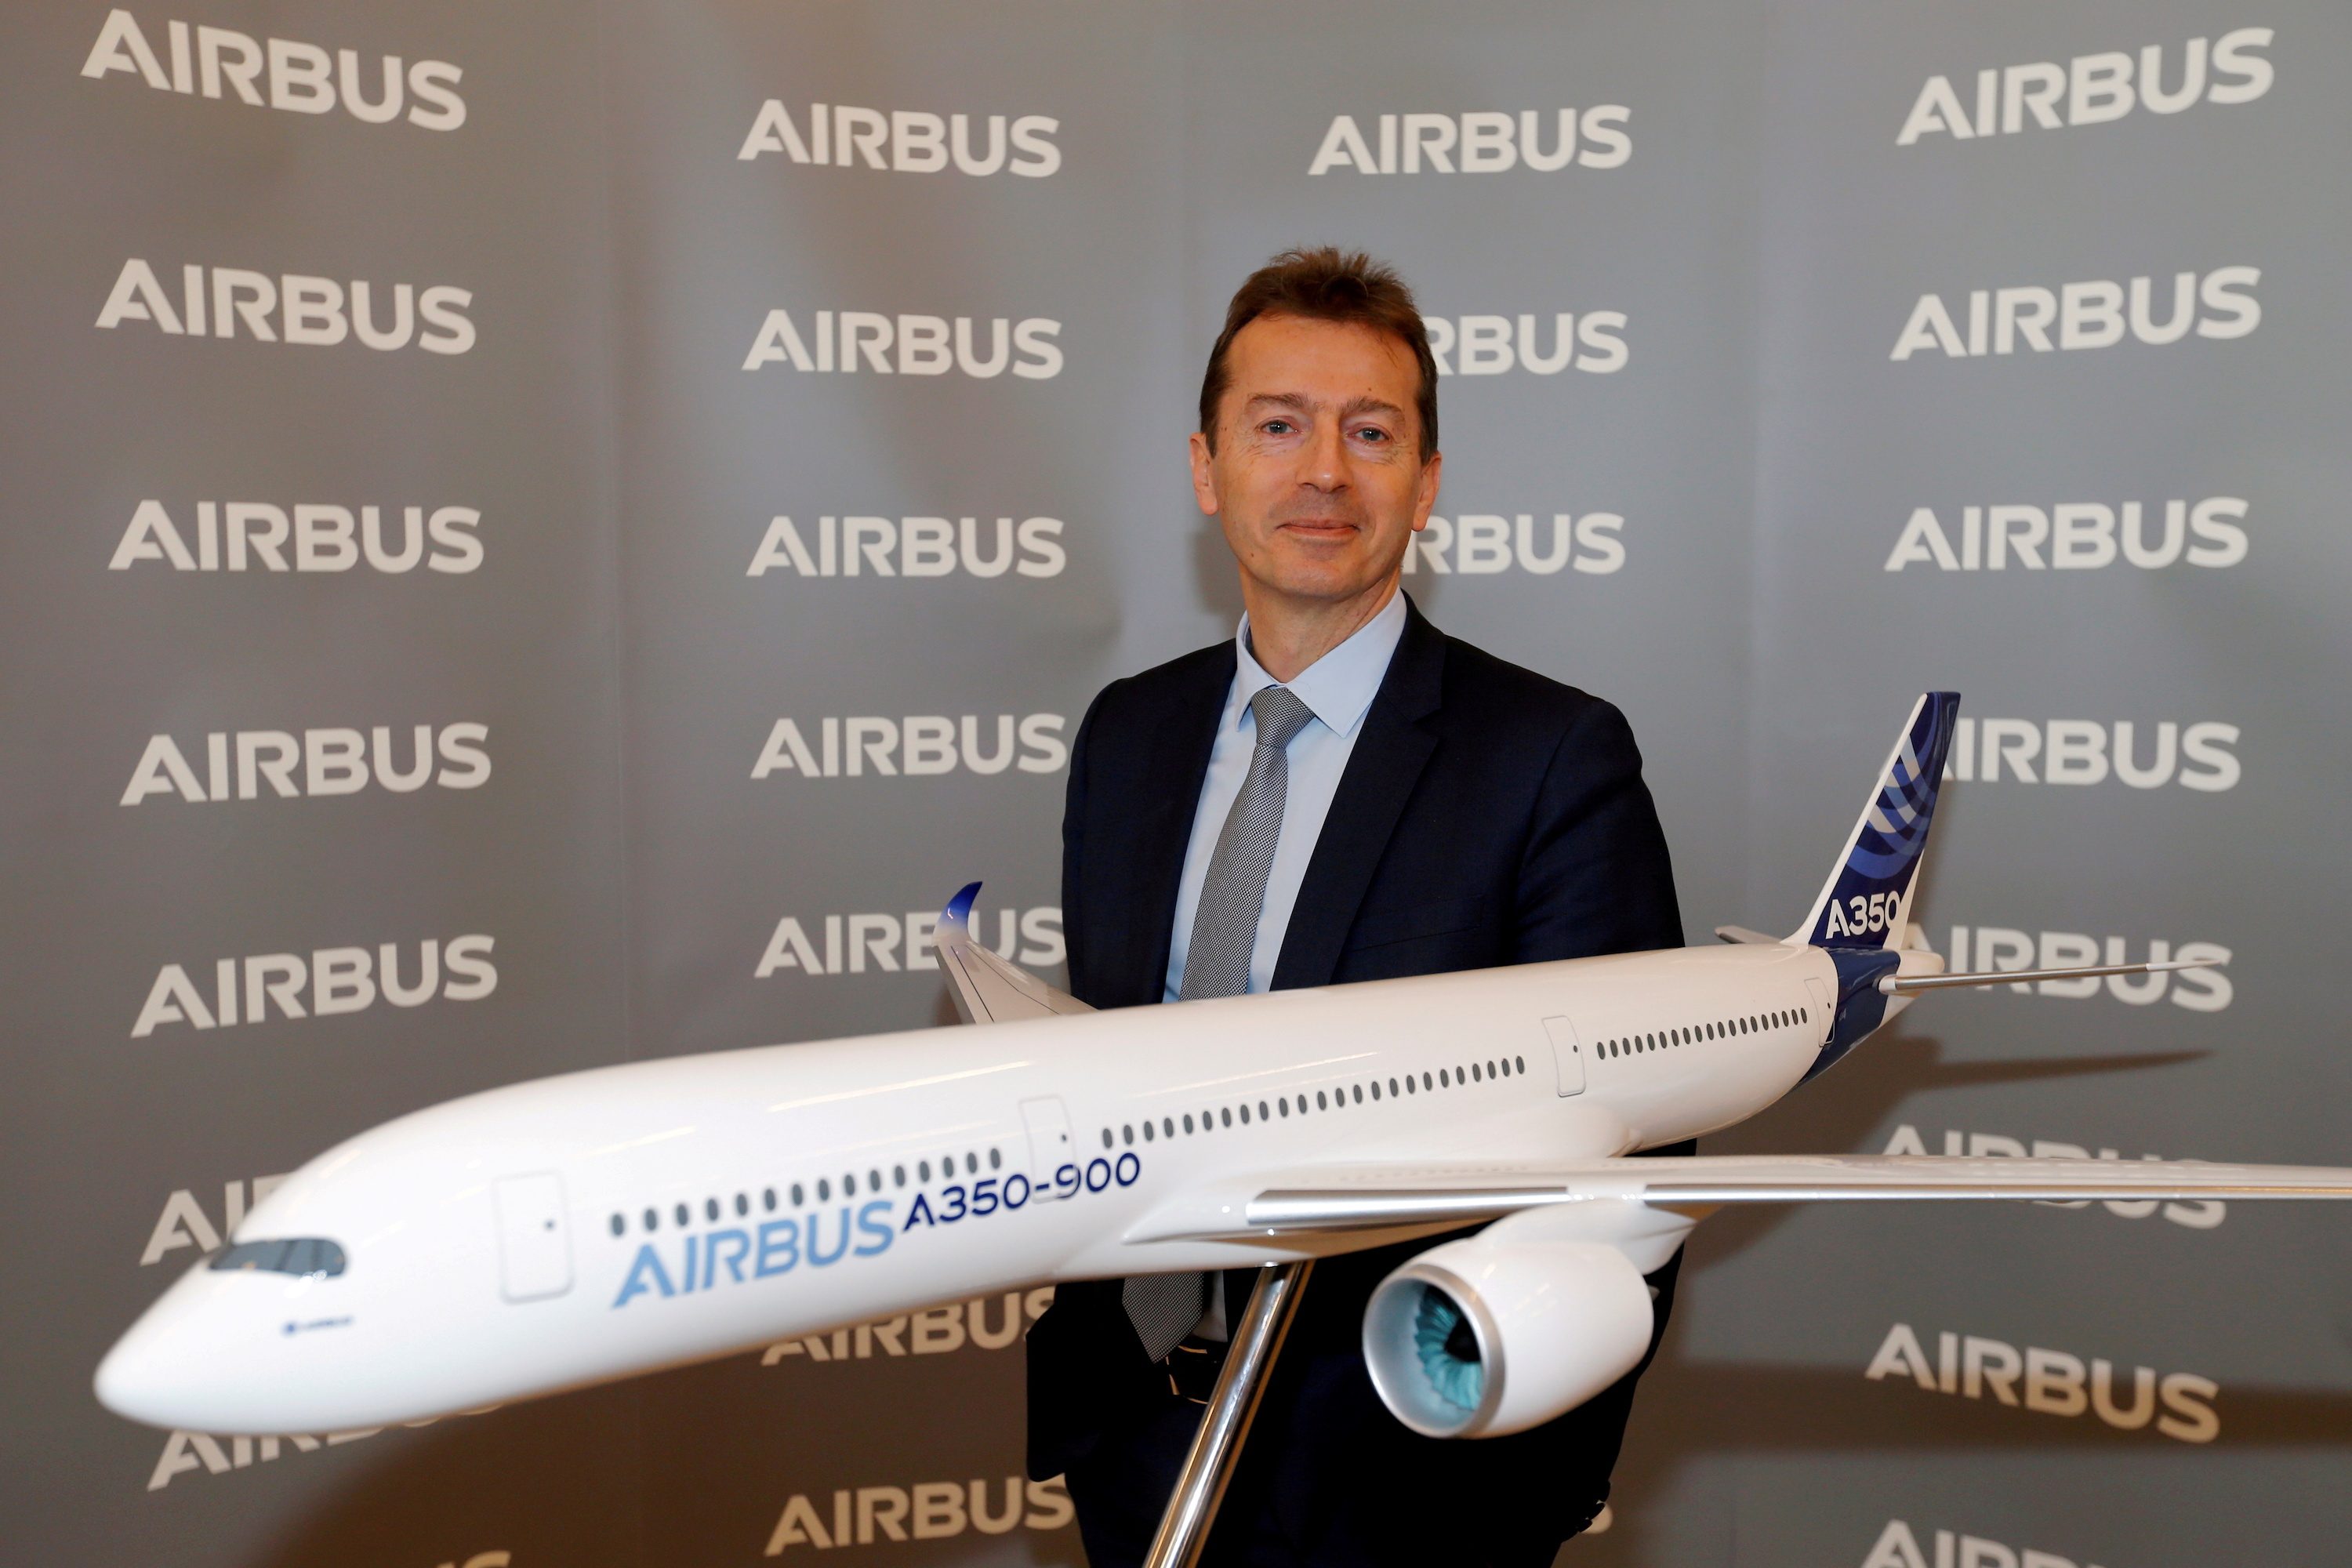 Airbus clings to jet delivery goal despite supply snags